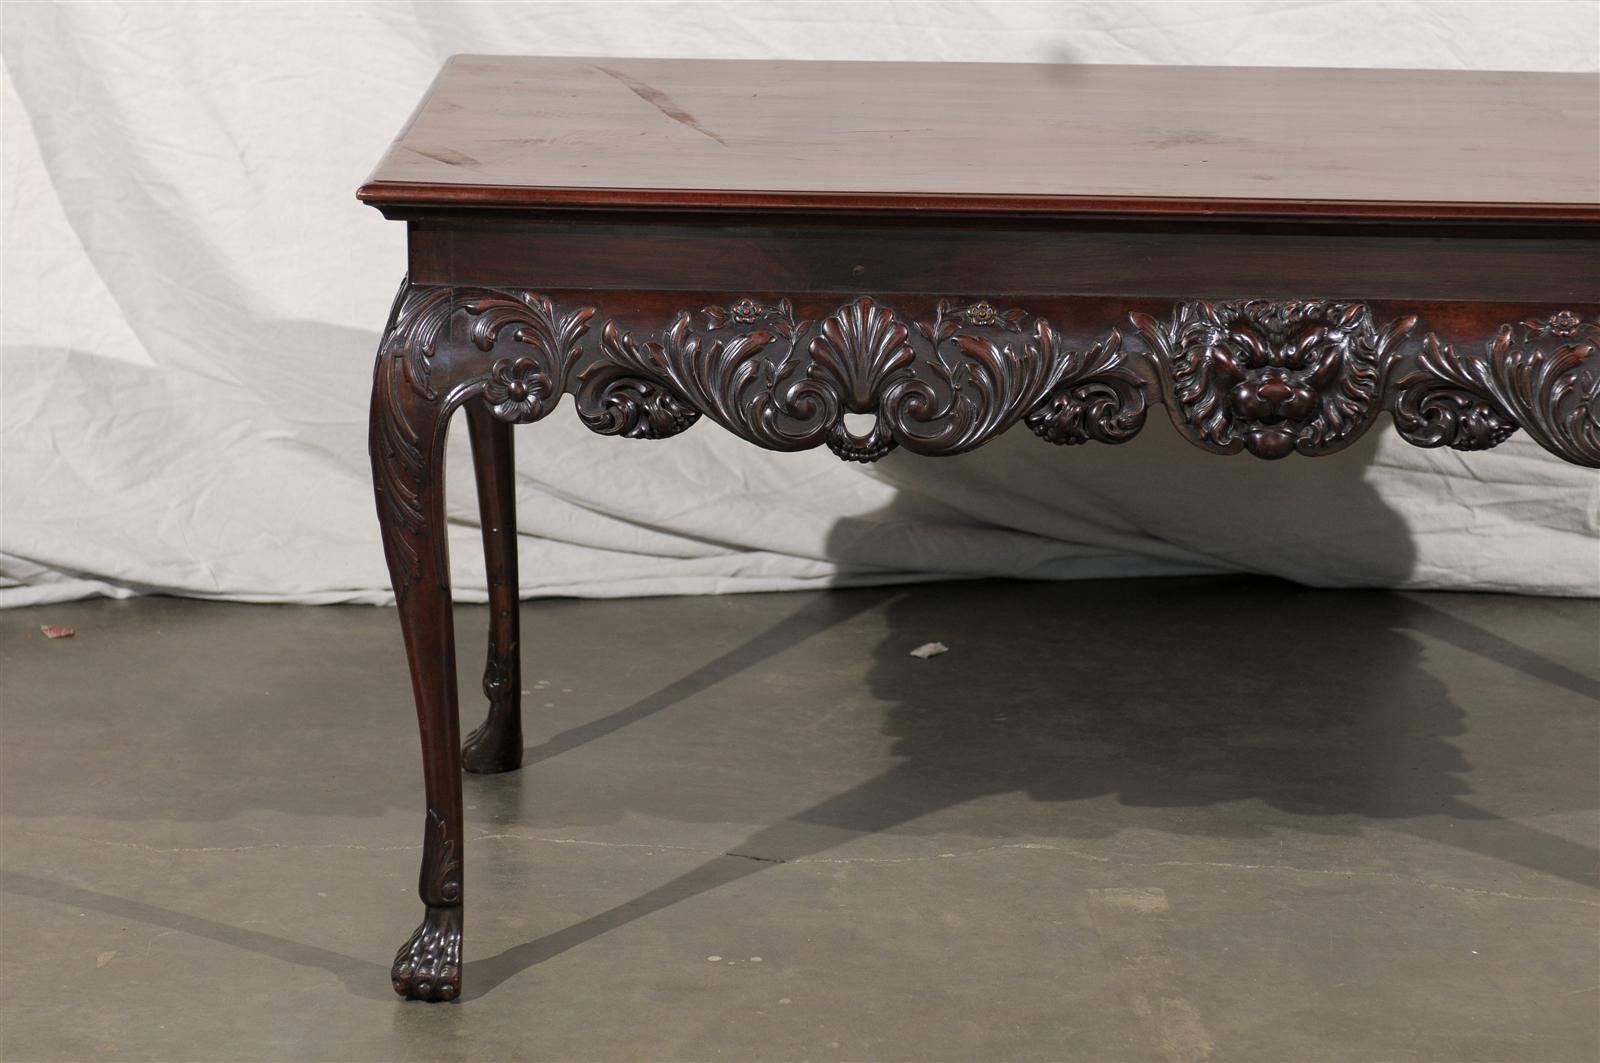 Early 19th Century Irish Center Table with Lion Mask (Isländisch)